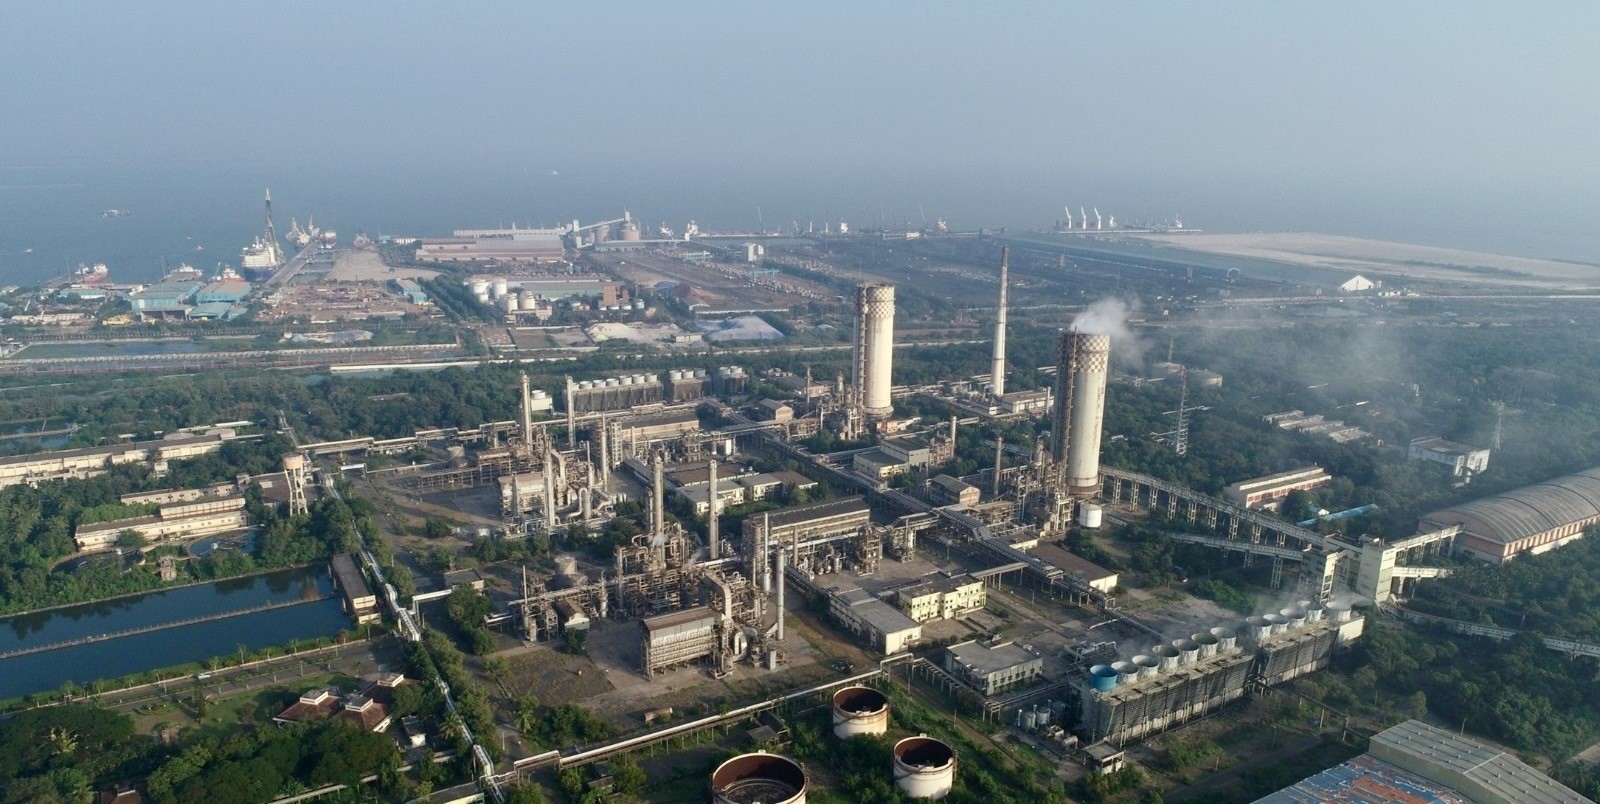 Ammonia production facility and port infrastructure in Kakinada on East coast of India